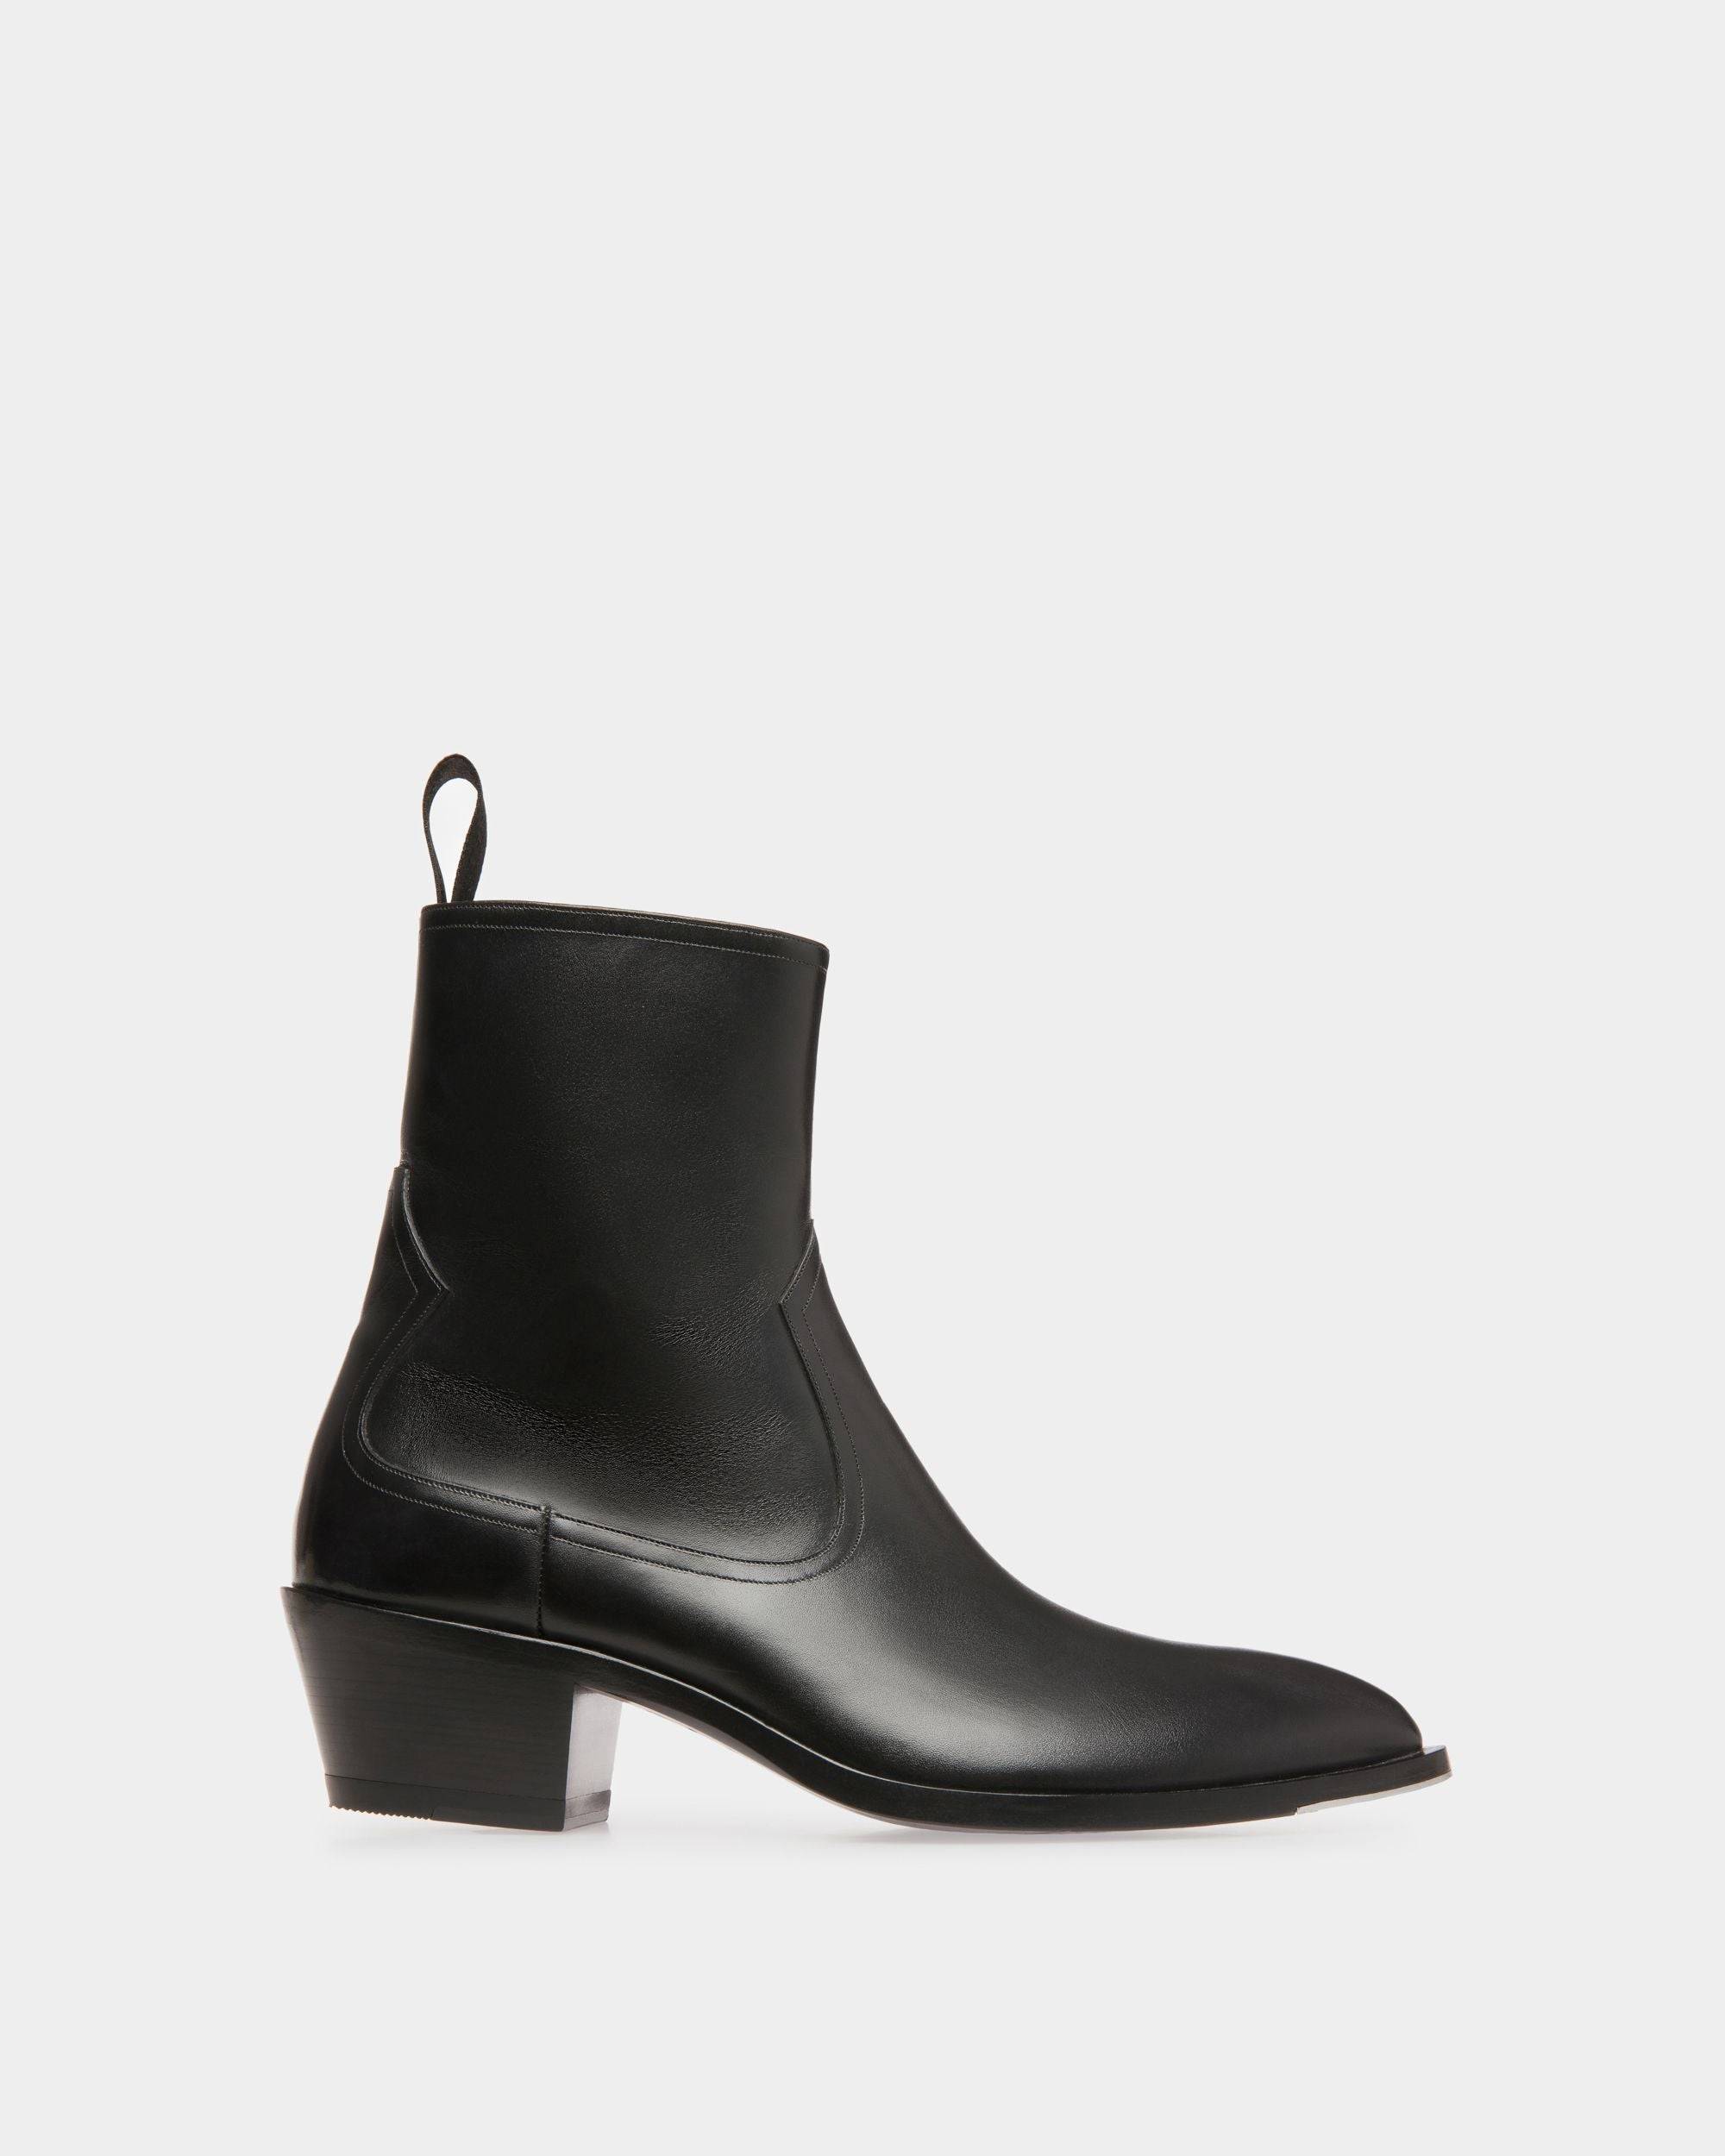 Women's Vegas Boots In Black Leather | Bally | Still Life Side